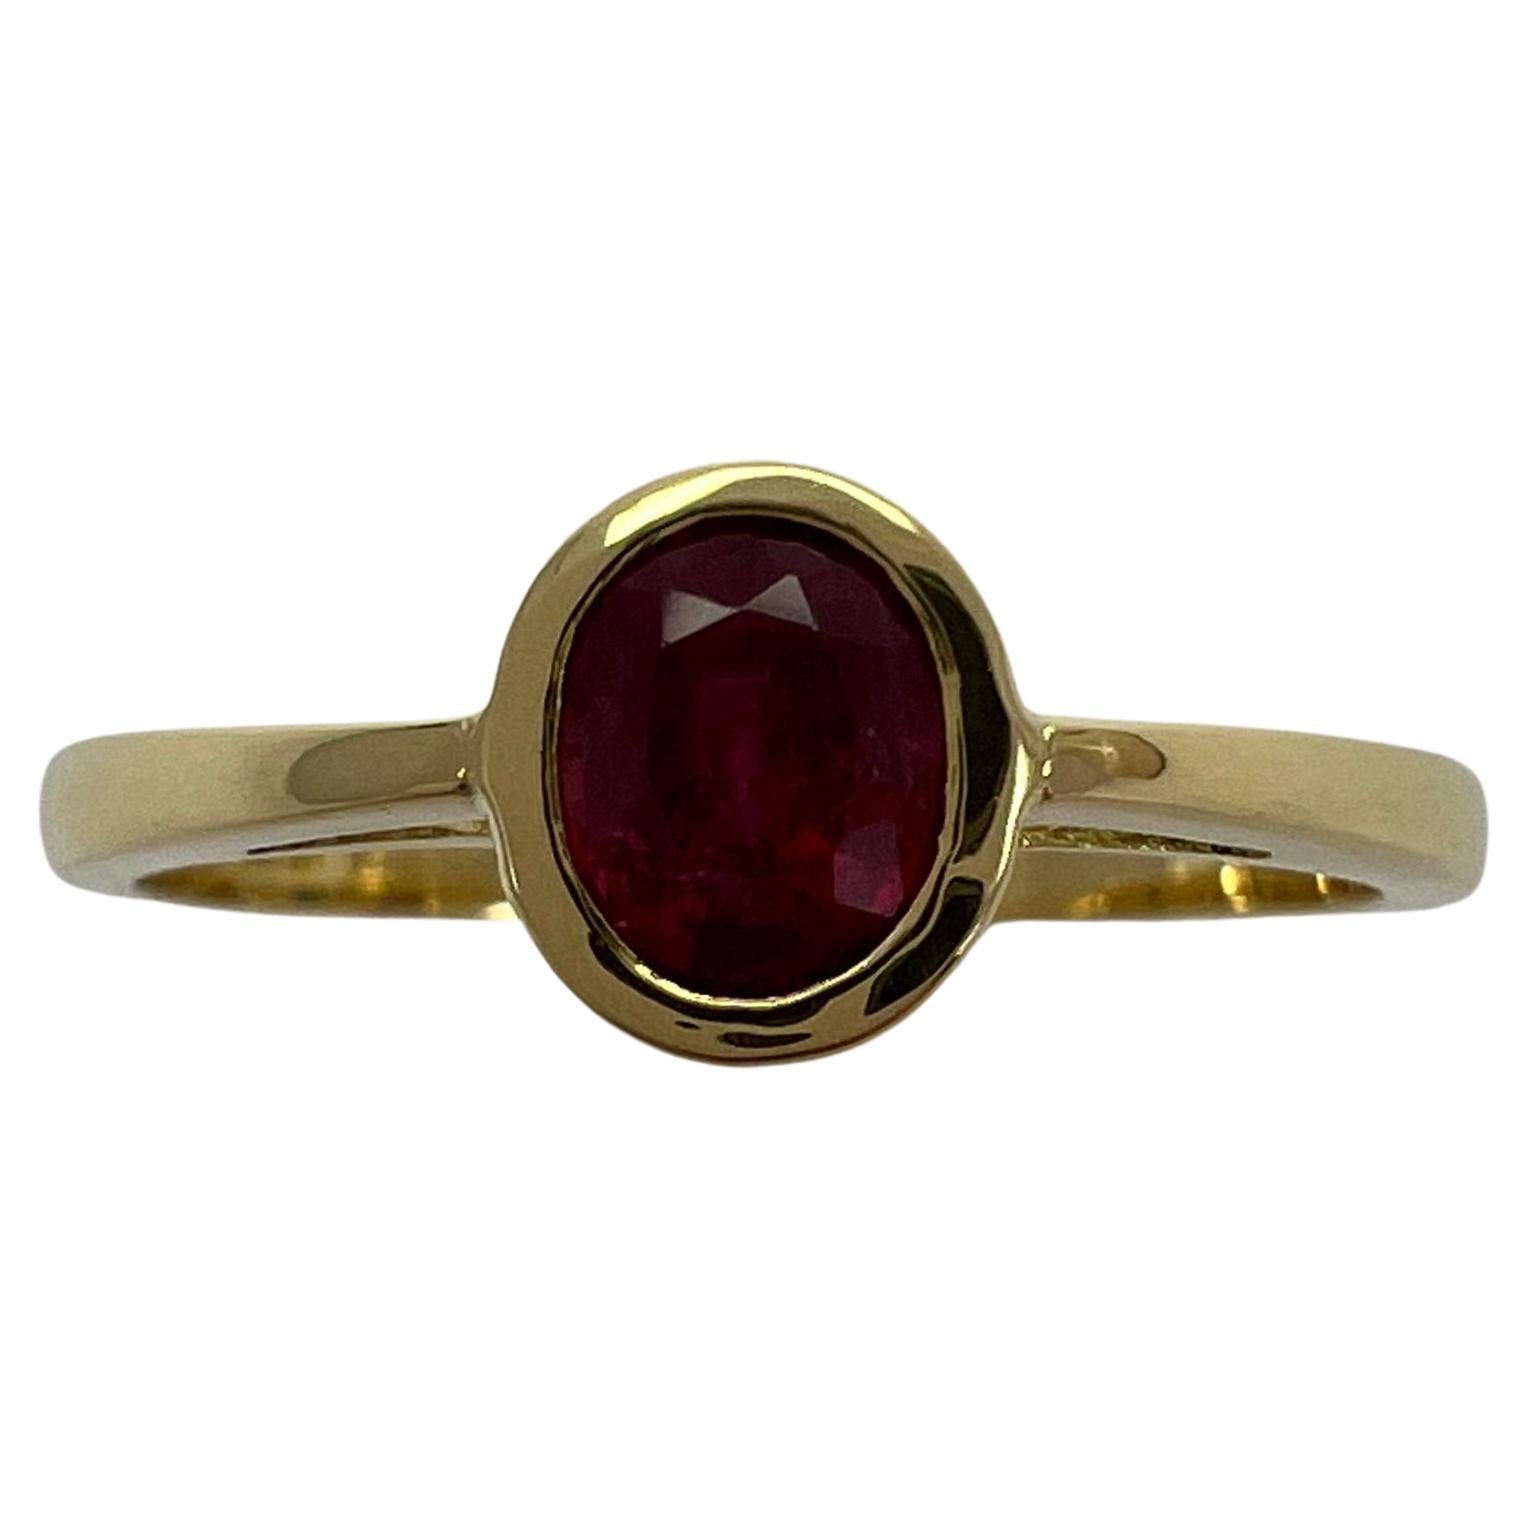 0.75ct Vivid Red Ruby Oval Cut Bezel Rubover Solitaire en or jaune 18k